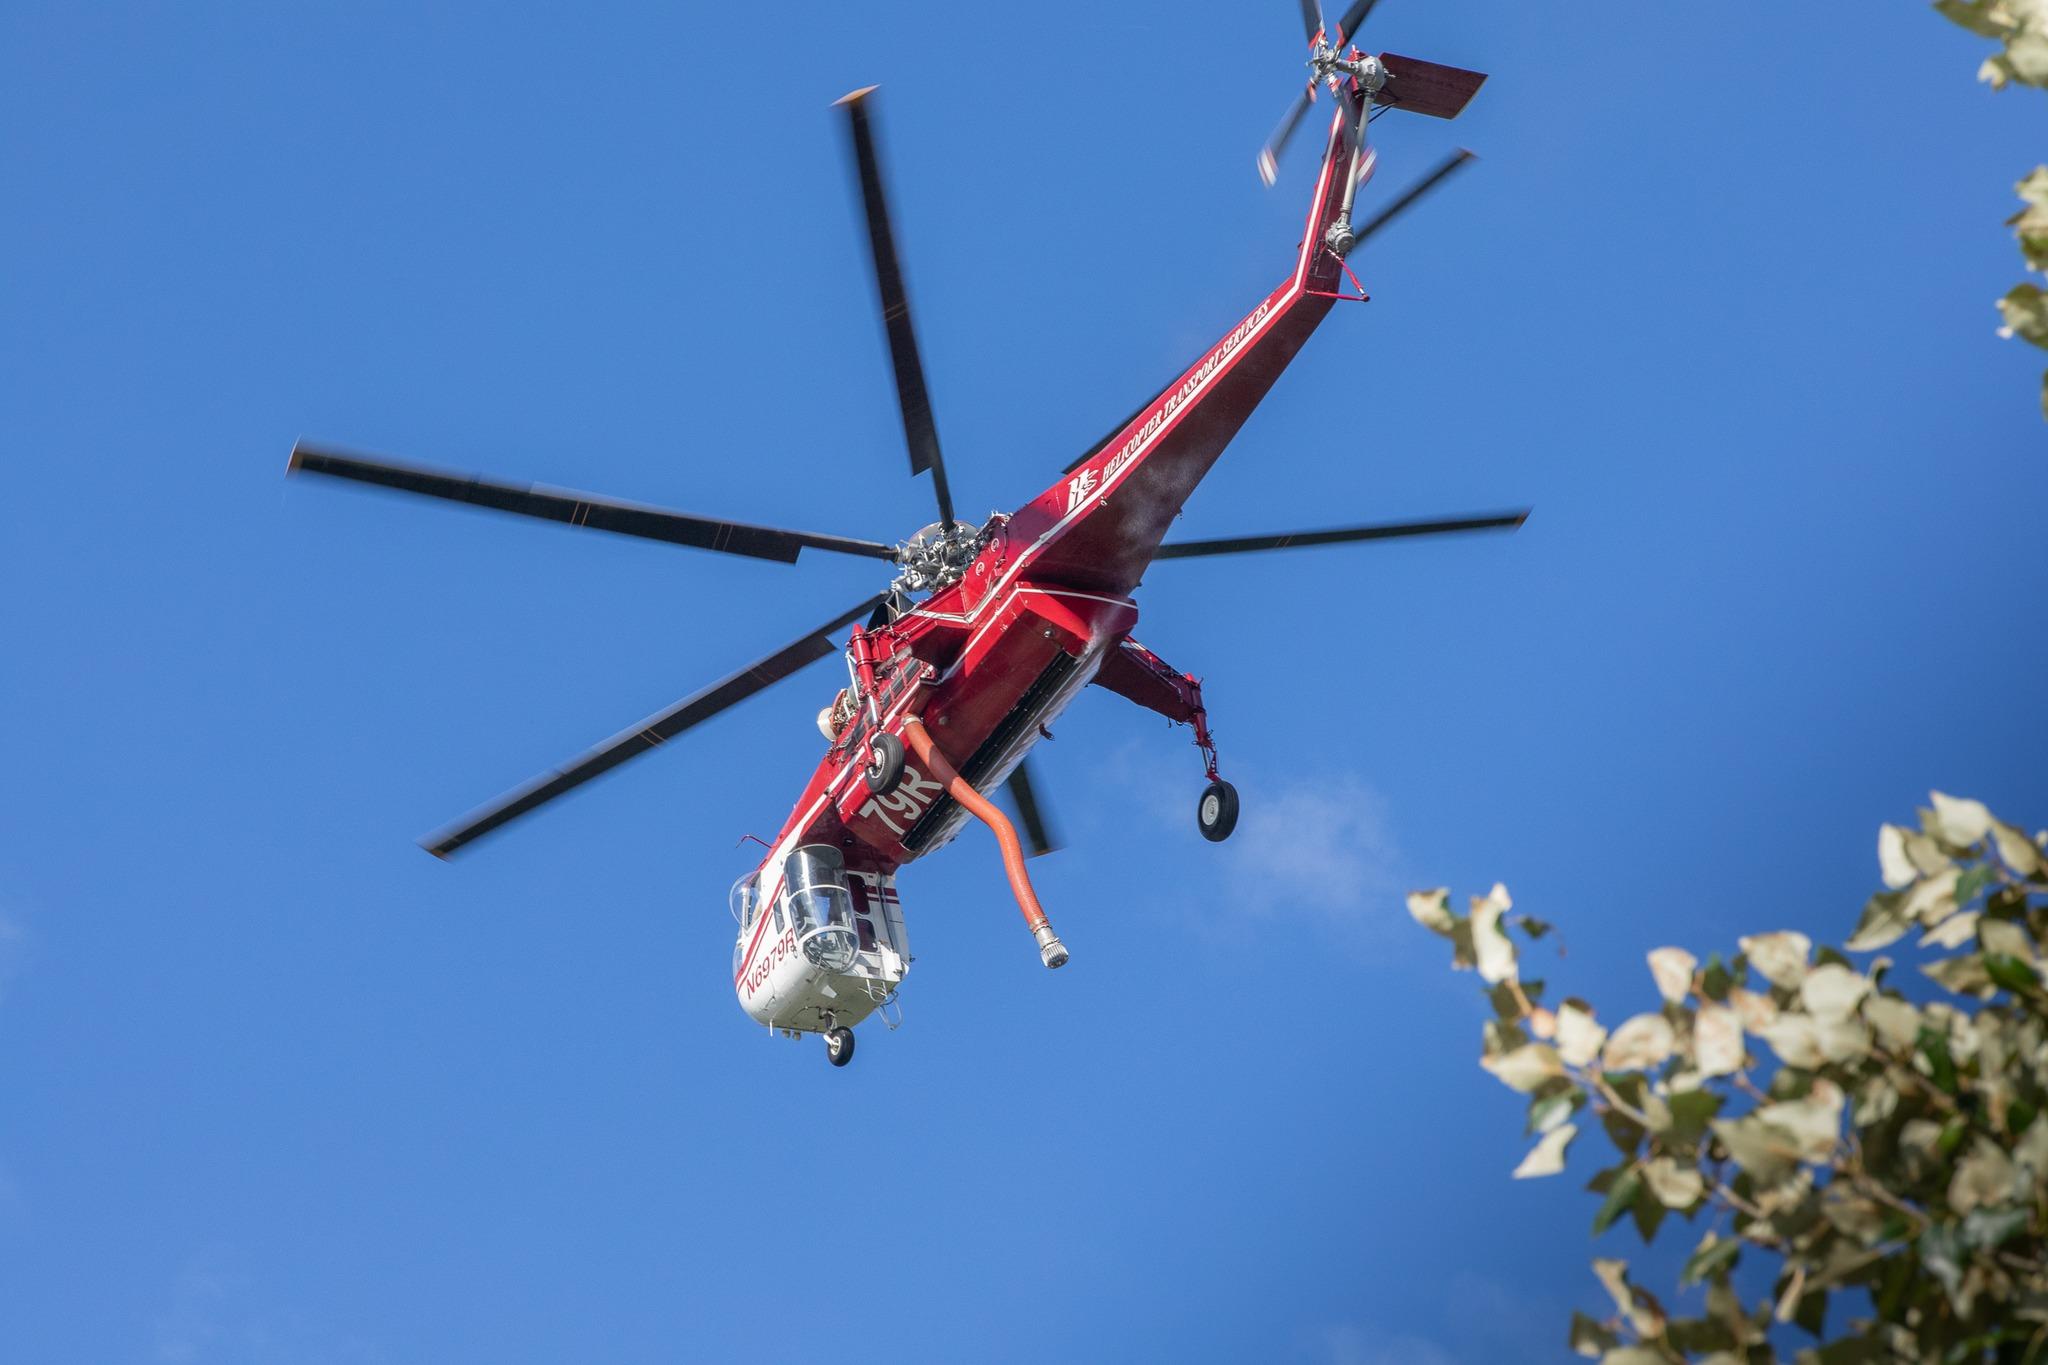 This is an image of a helicopter from below